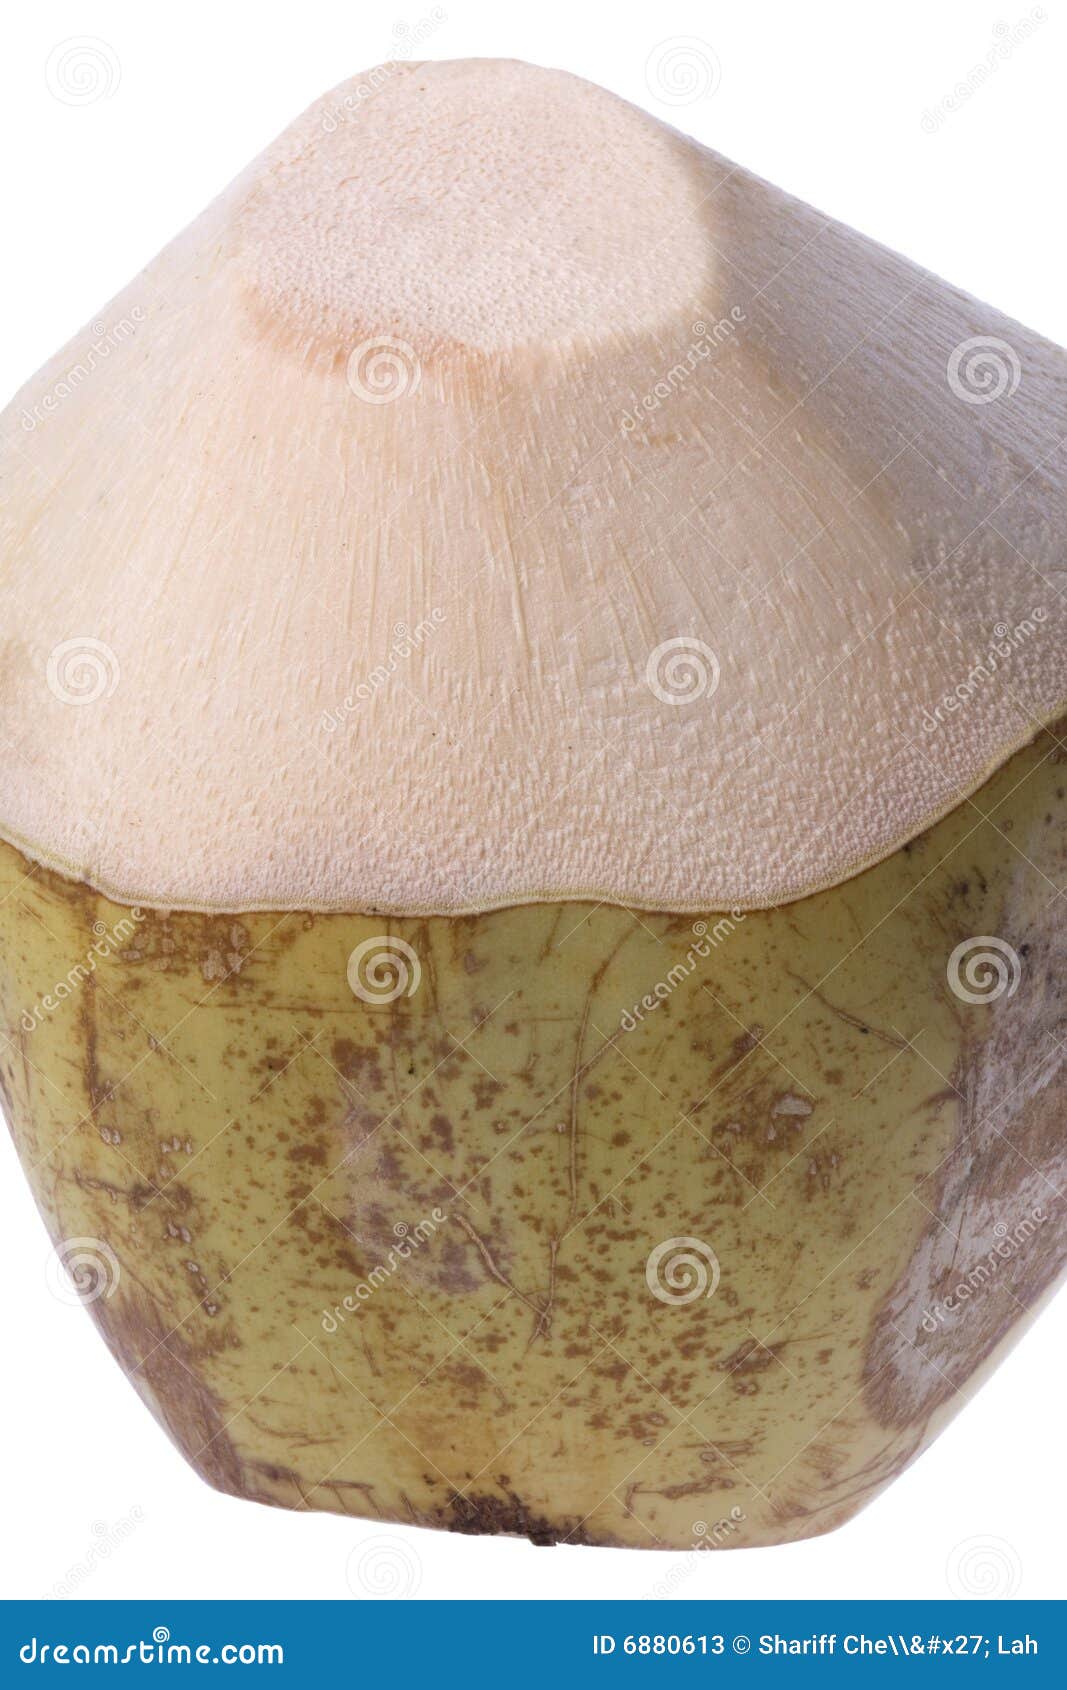 Fresh coconut. Fresh partially peeled coconut isolated on white background.